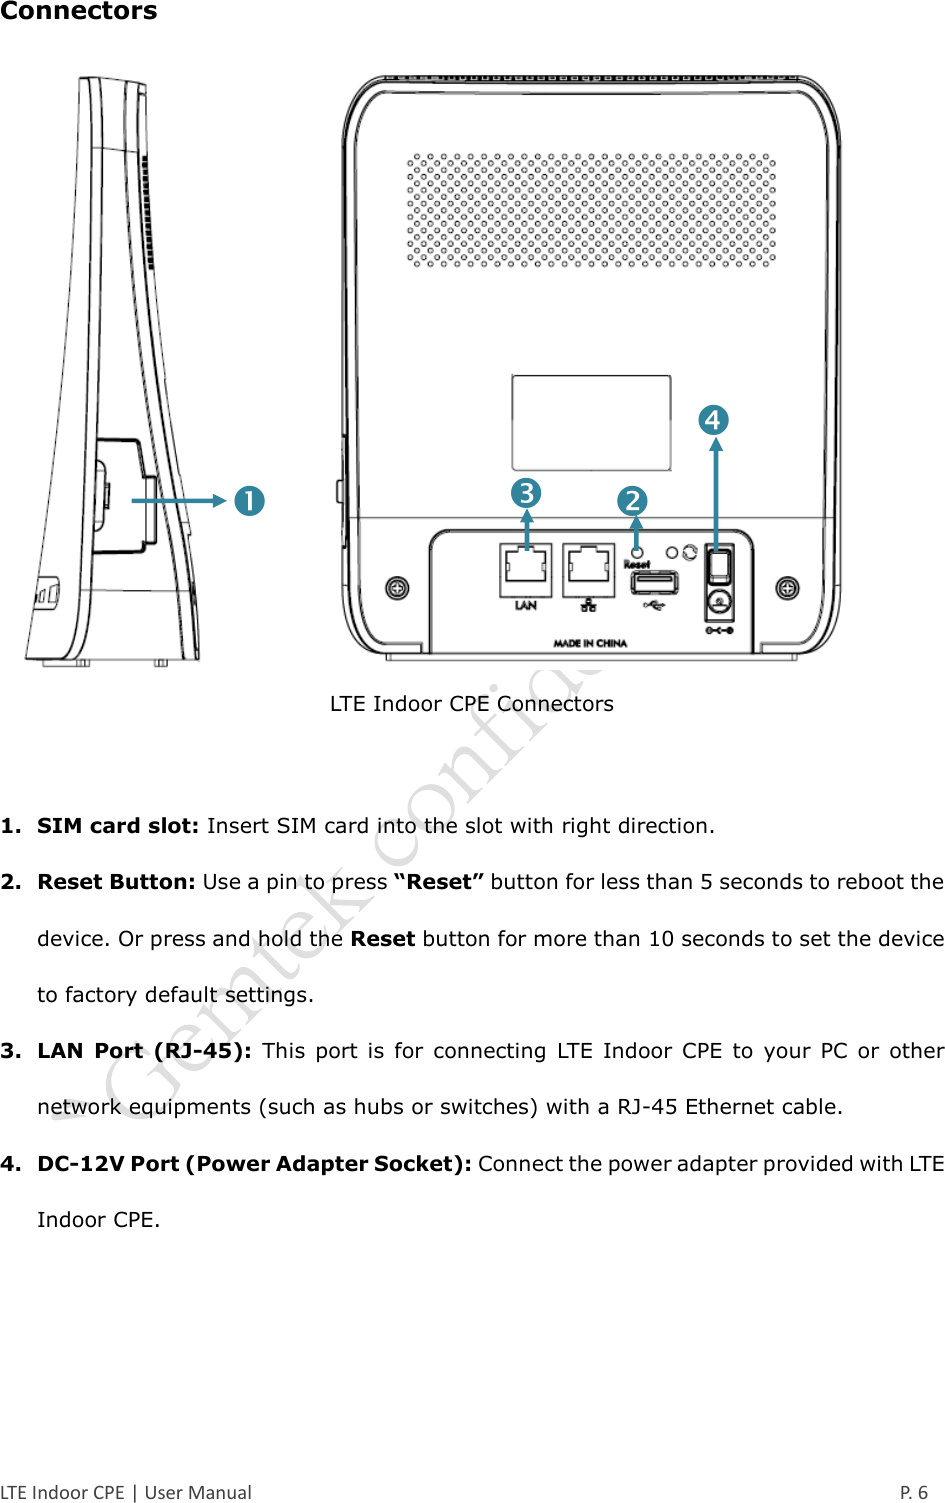  LTE Indoor CPE | User Manual      P. 6 Connectors  LTE Indoor CPE Connectors  1. SIM card slot: Insert SIM card into the slot with right direction. 2. Reset Button: Use a pin to press “Reset” button for less than 5 seconds to reboot the device. Or press and hold the Reset button for more than 10 seconds to set the device to factory default settings. 3. LAN  Port  (RJ-45):  This  port  is  for  connecting  LTE  Indoor  CPE  to  your  PC  or  other network equipments (such as hubs or switches) with a RJ-45 Ethernet cable. 4. DC-12V Port (Power Adapter Socket): Connect the power adapter provided with LTE Indoor CPE.    